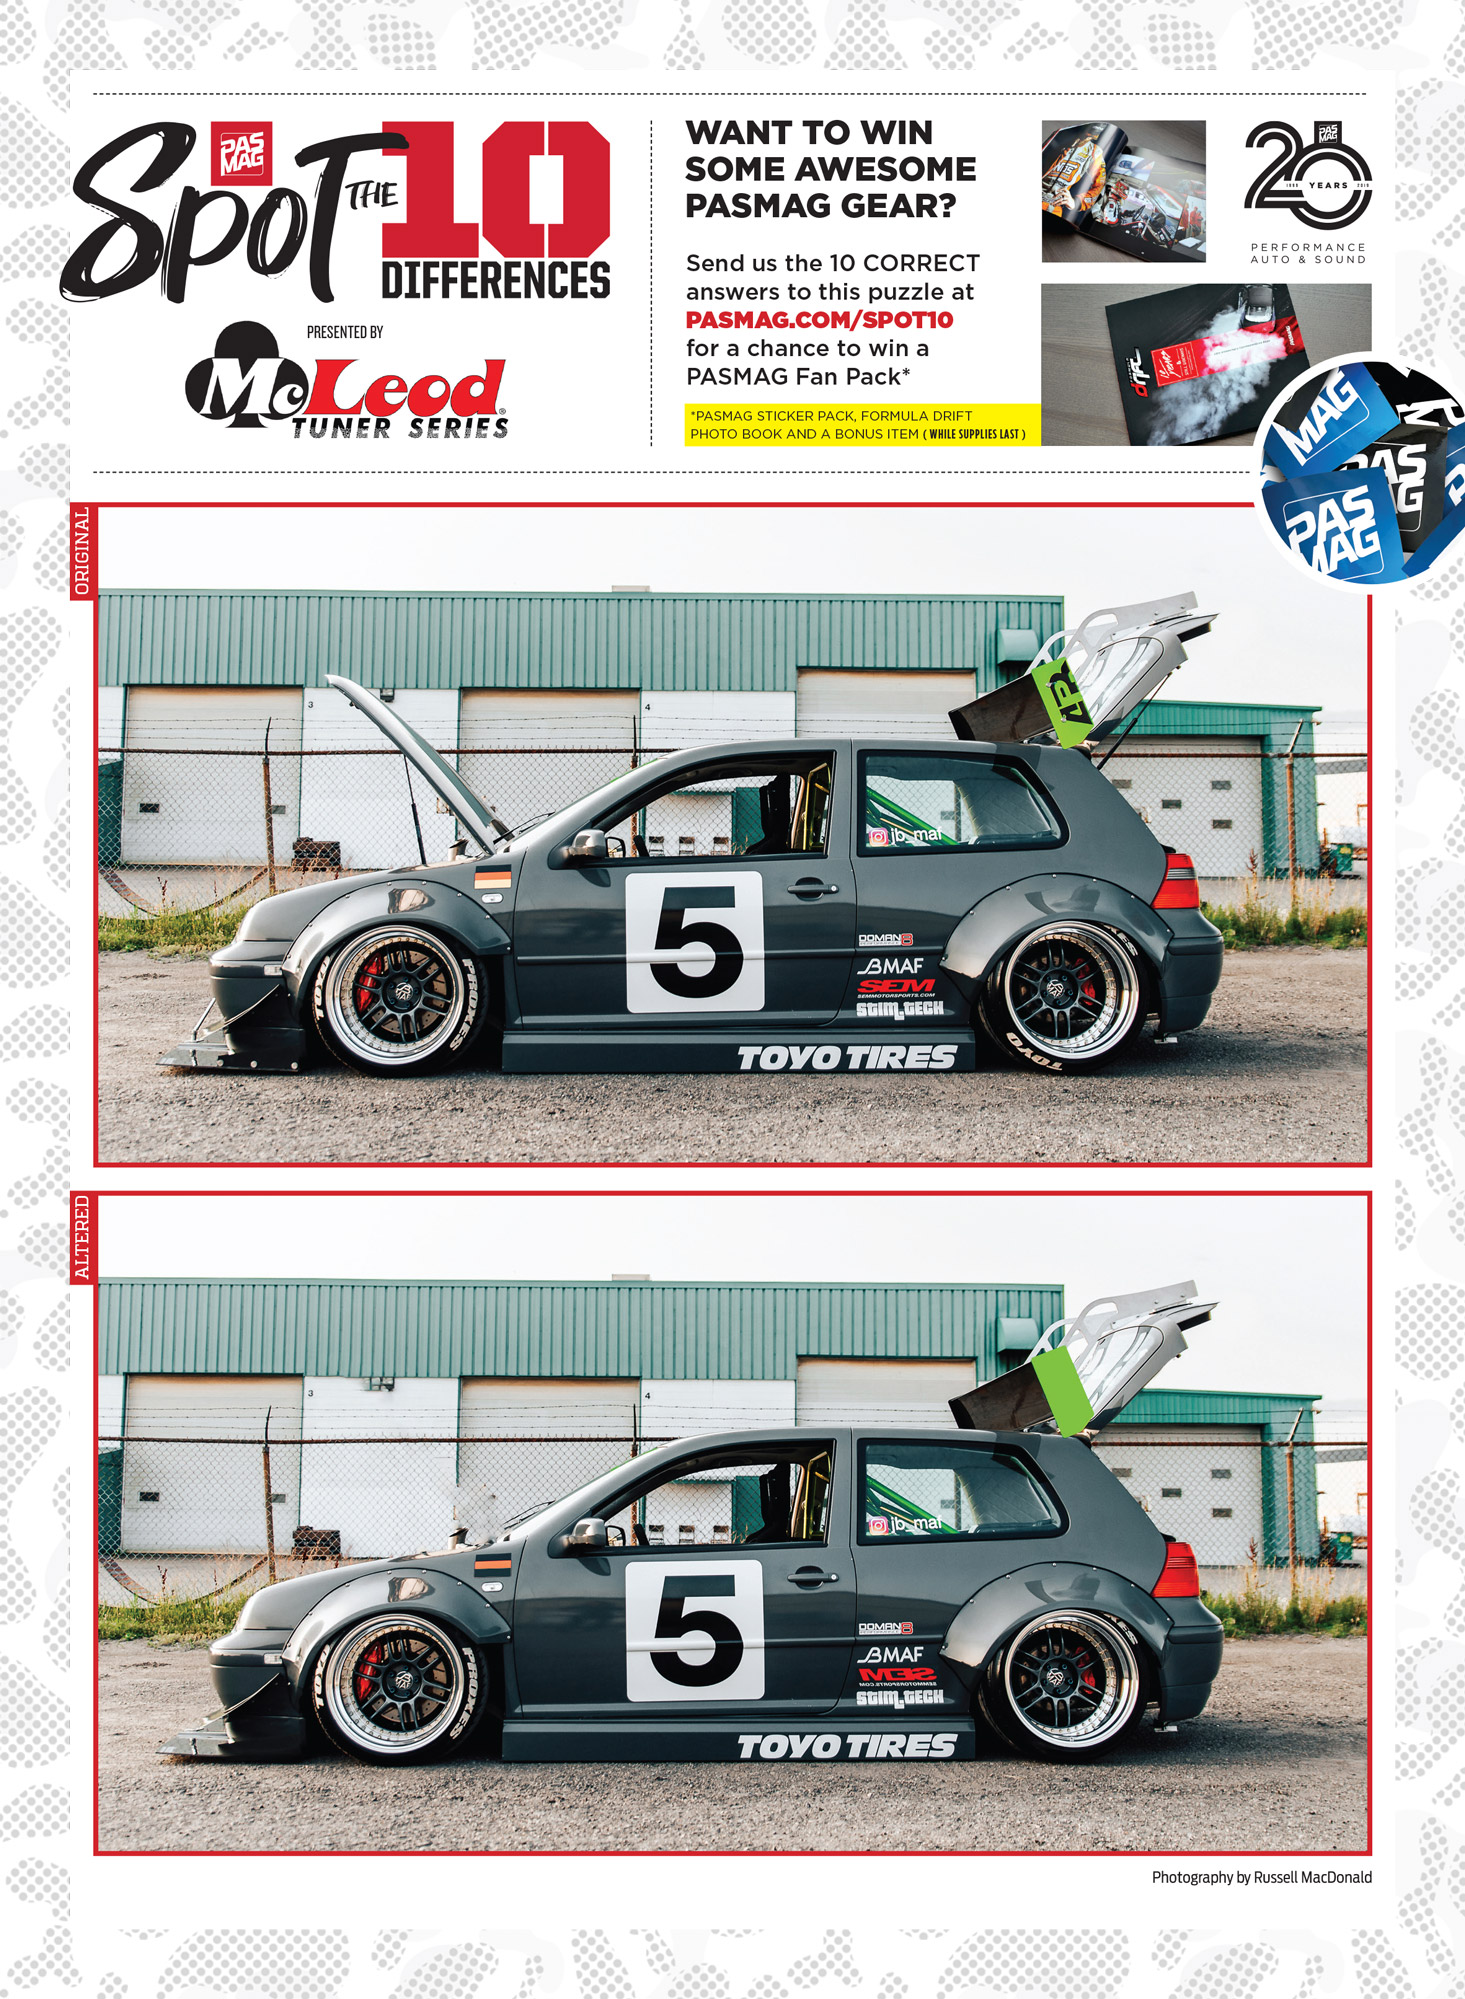 PASMAG Spot the Differences May 8 2020 Jason Bos 2003 VW Golf GTI pasmag